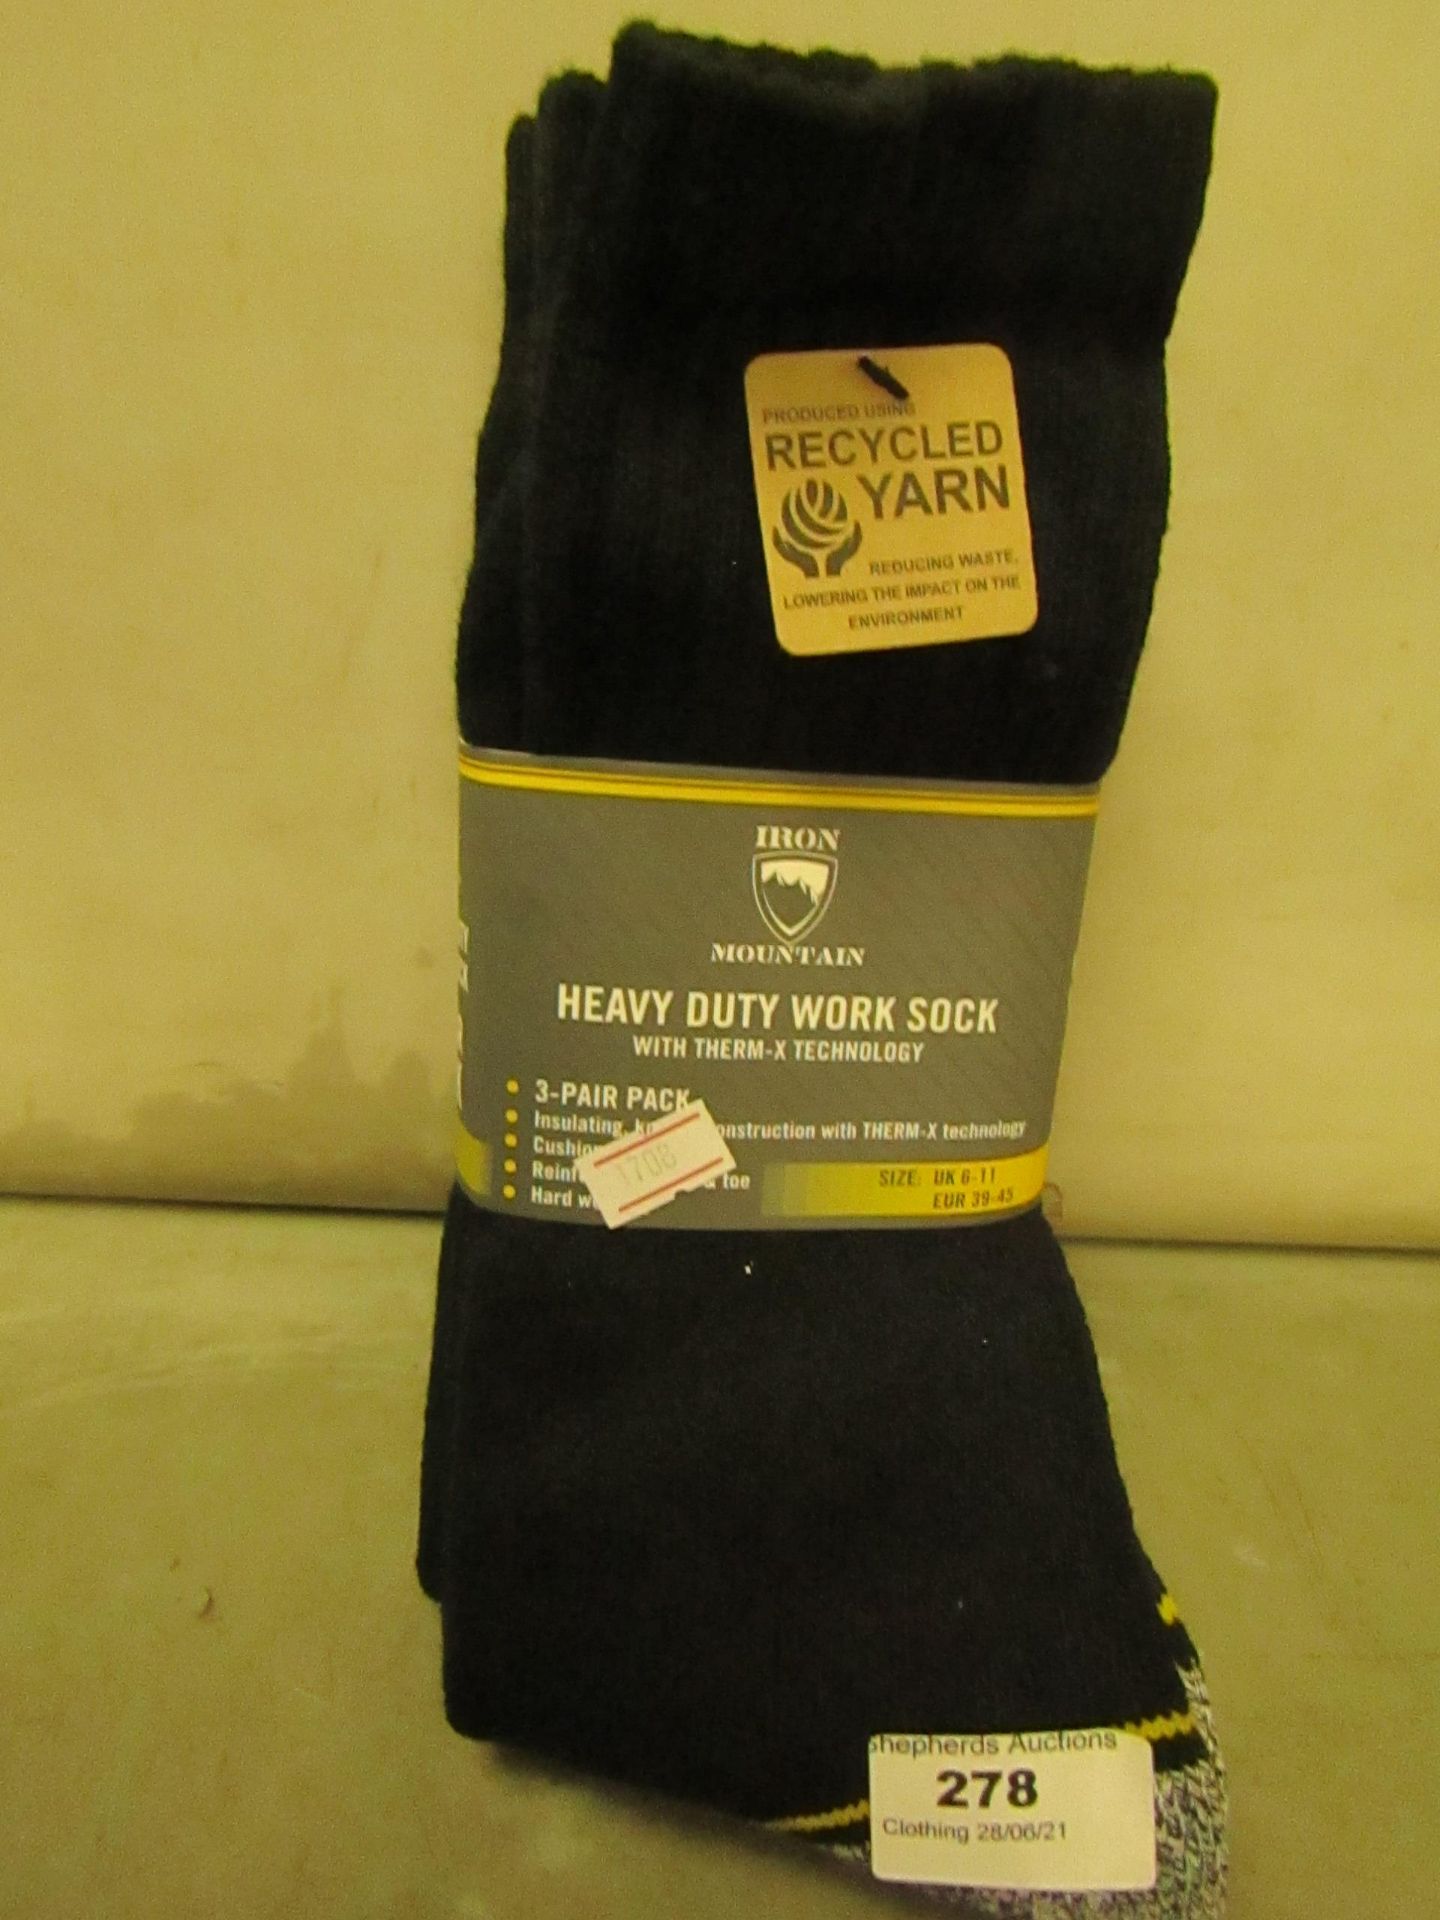 12 X Pairs of Heavy Duty Work Socks Size 6-11 New & Packaged